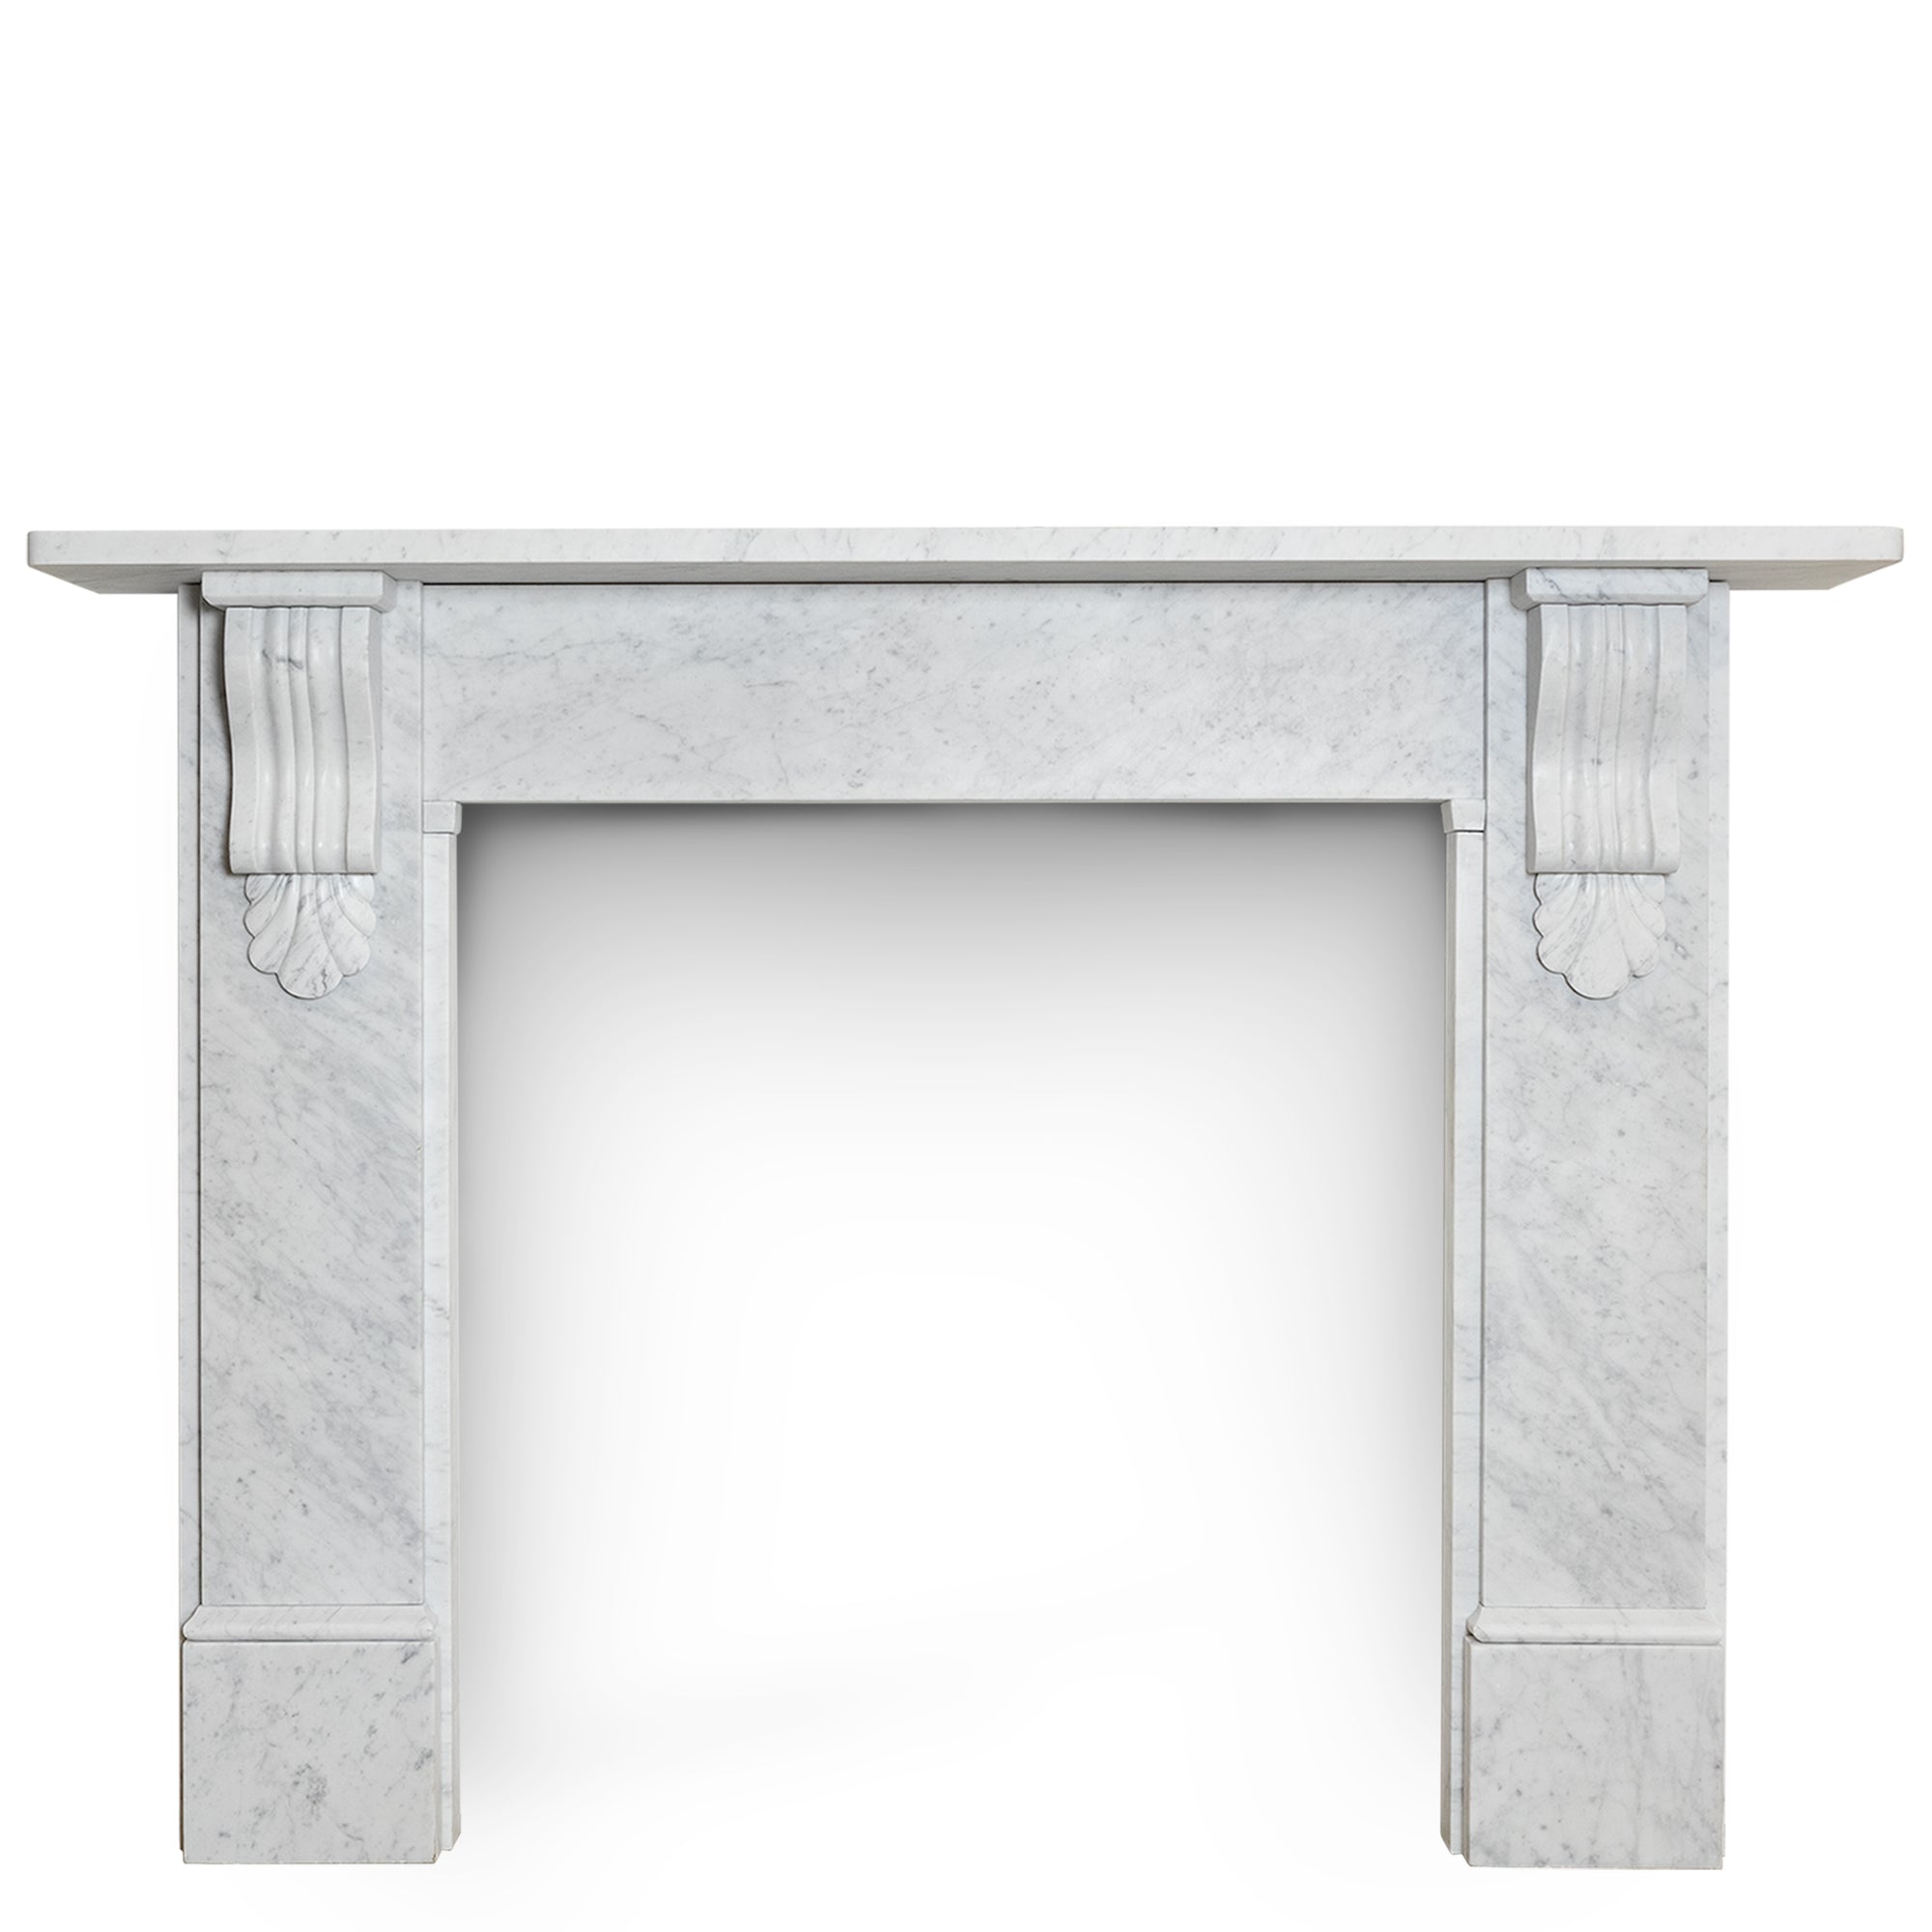 Bespoke Victorian Style Carrara Marble Fireplace Surround with Corbels | The Architectural Forum